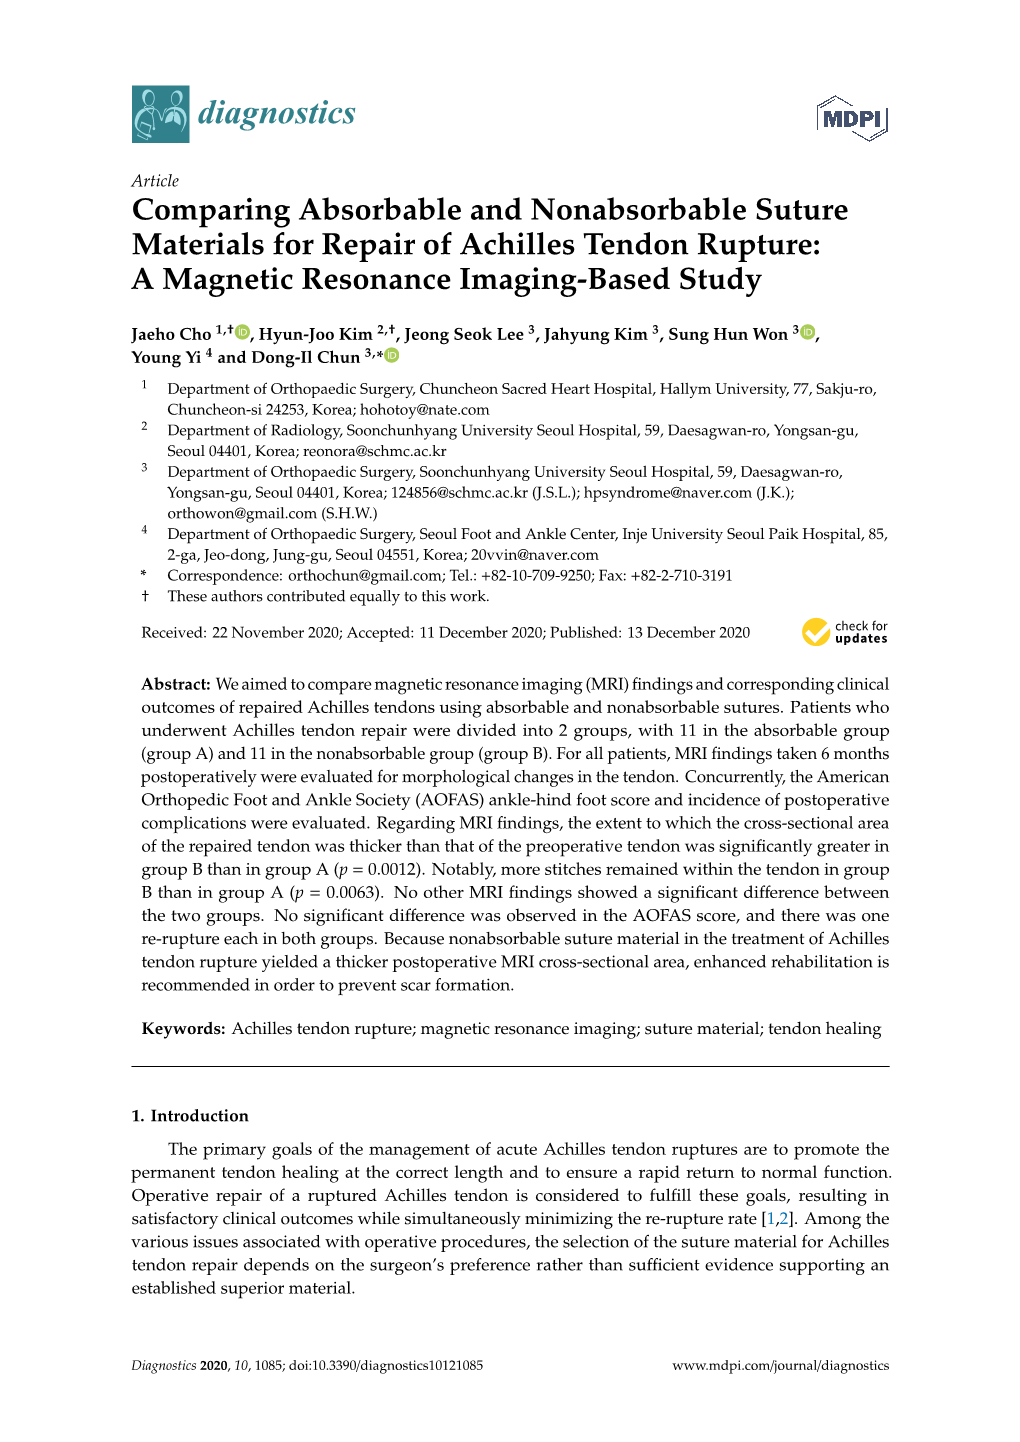 Comparing Absorbable and Nonabsorbable Suture Materials for Repair of Achilles Tendon Rupture: a Magnetic Resonance Imaging-Based Study